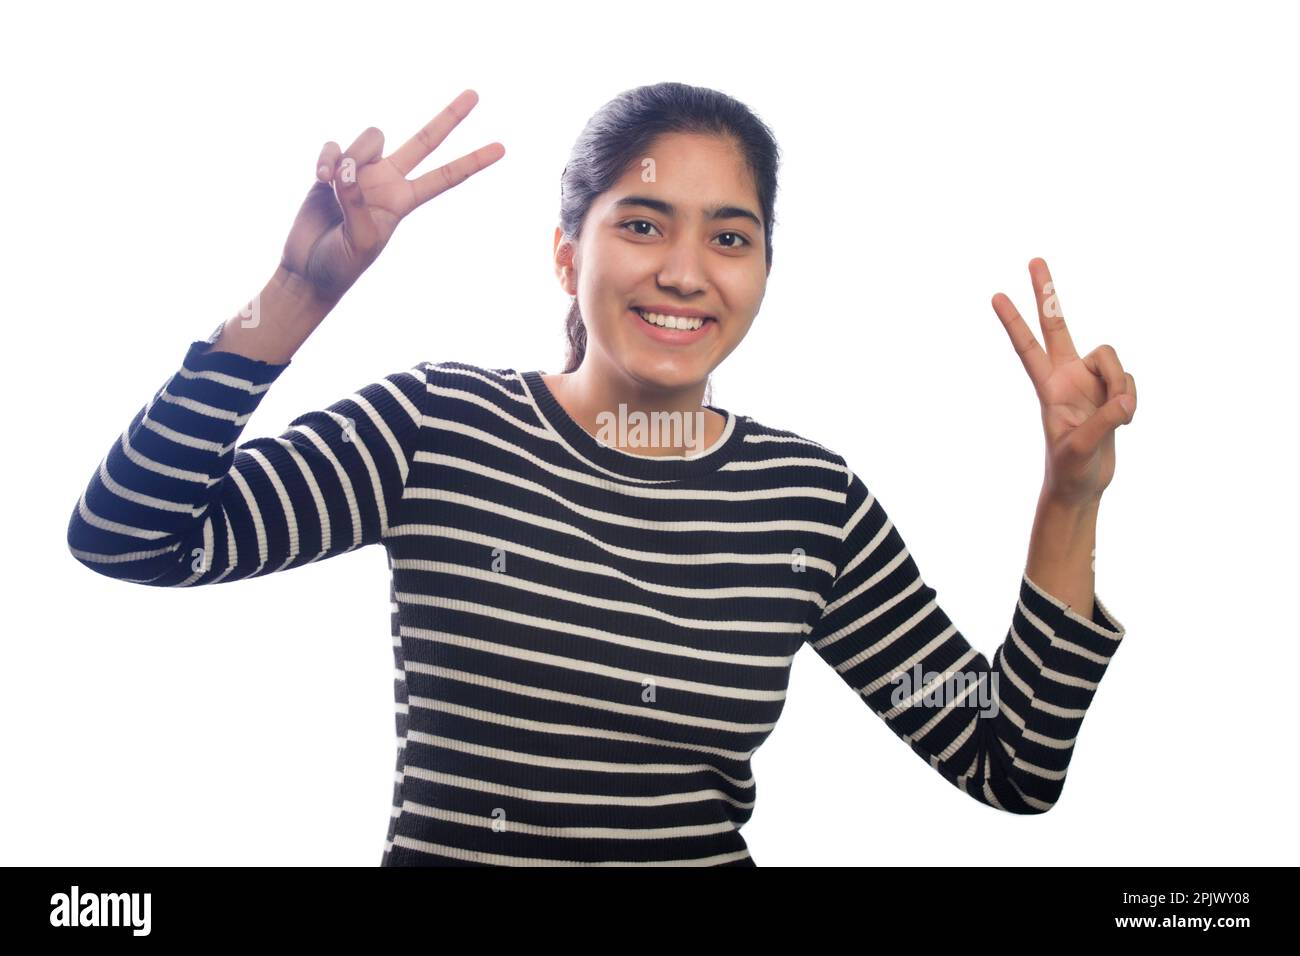 Portrait of happy young woman showing victory sign Stock Photo